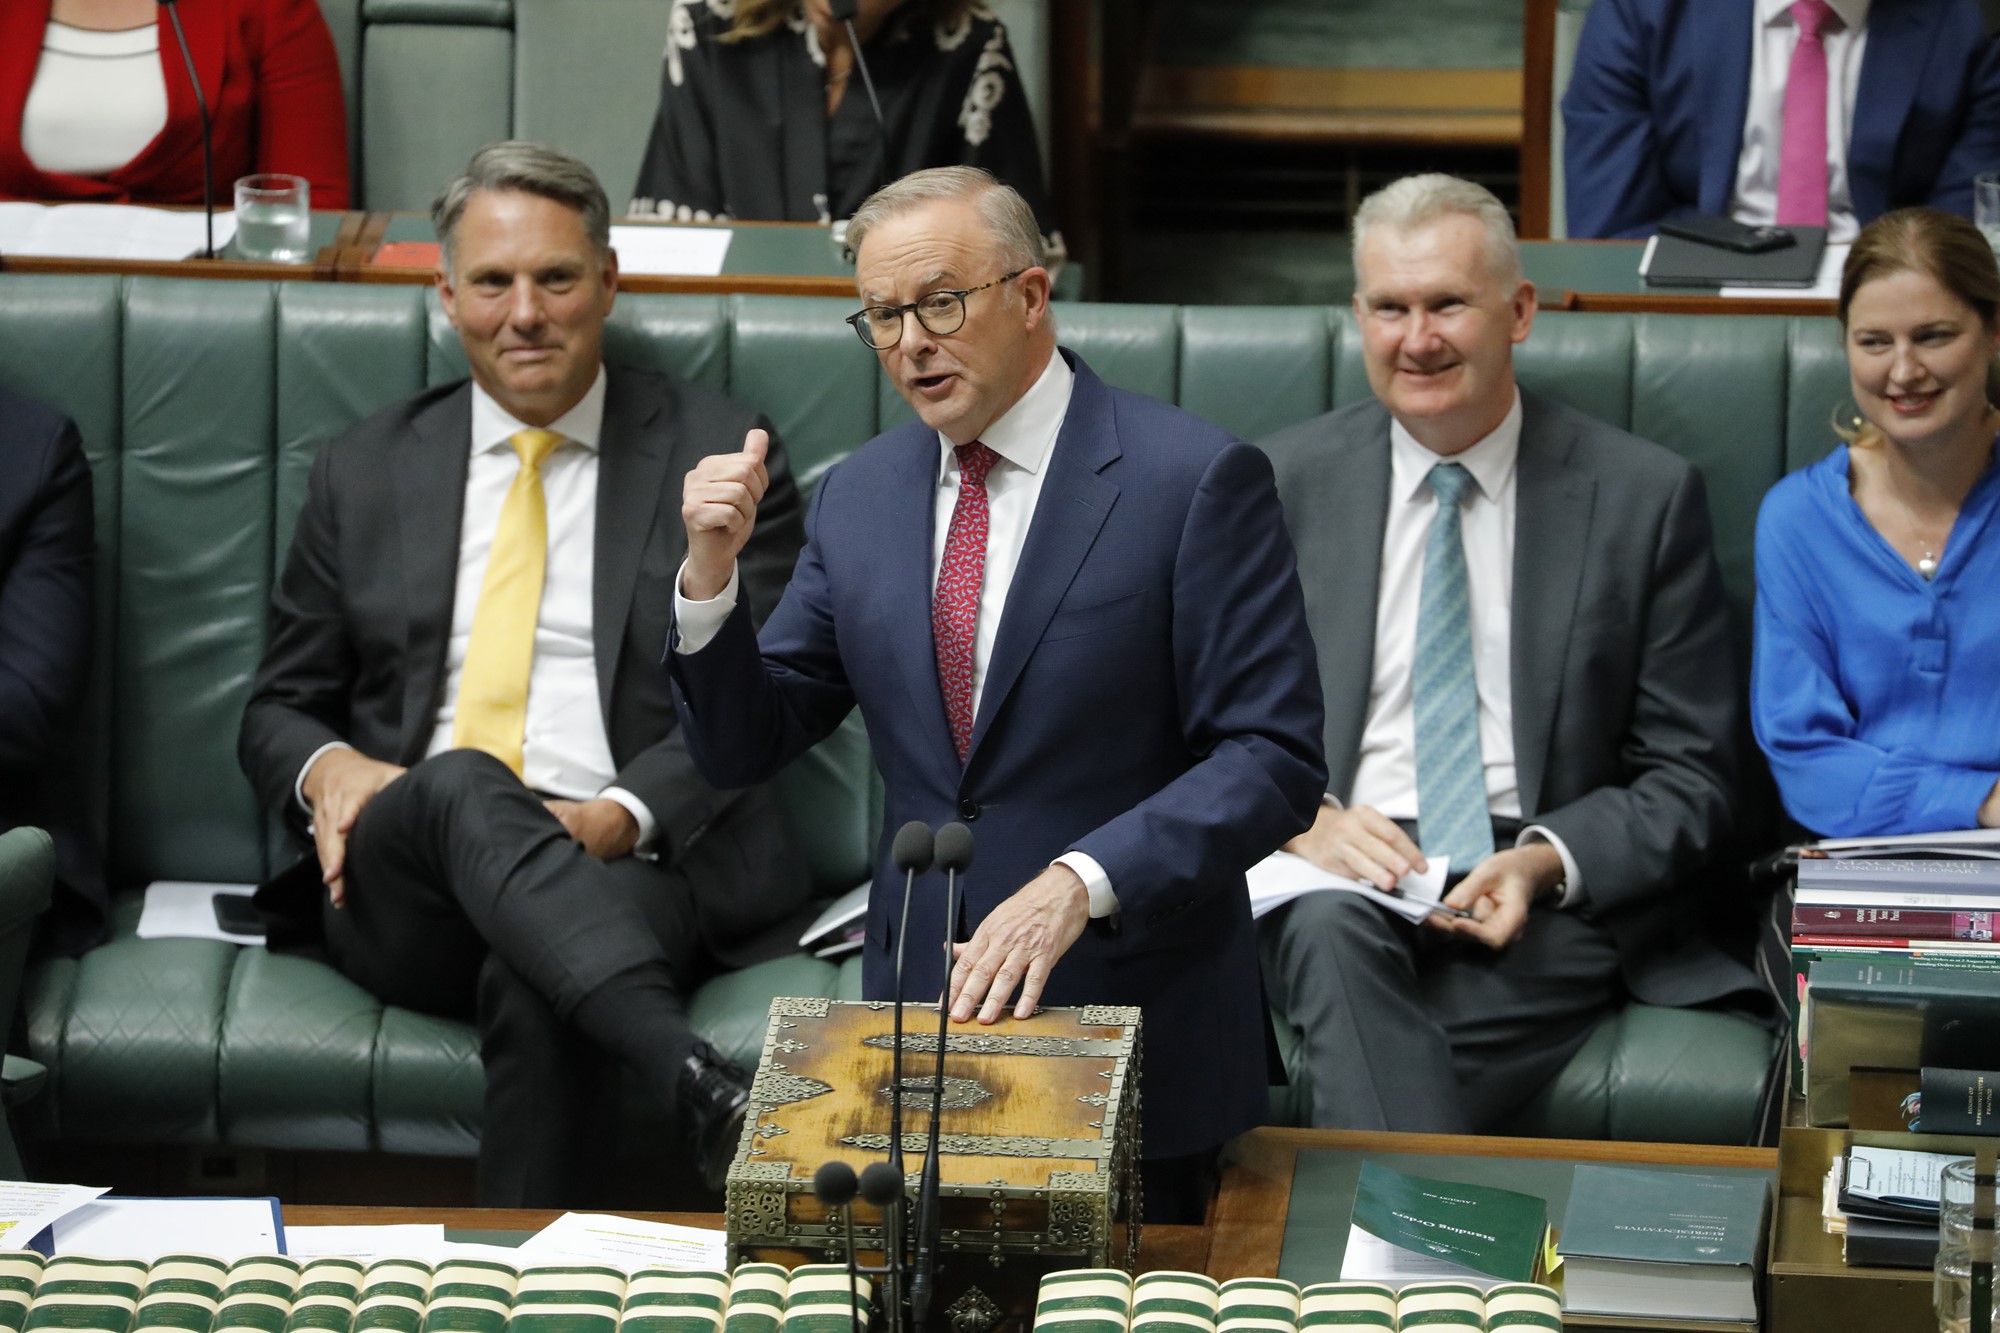 anthony albanese gestures while speaking in parliament house as front benchers laugh behind him 